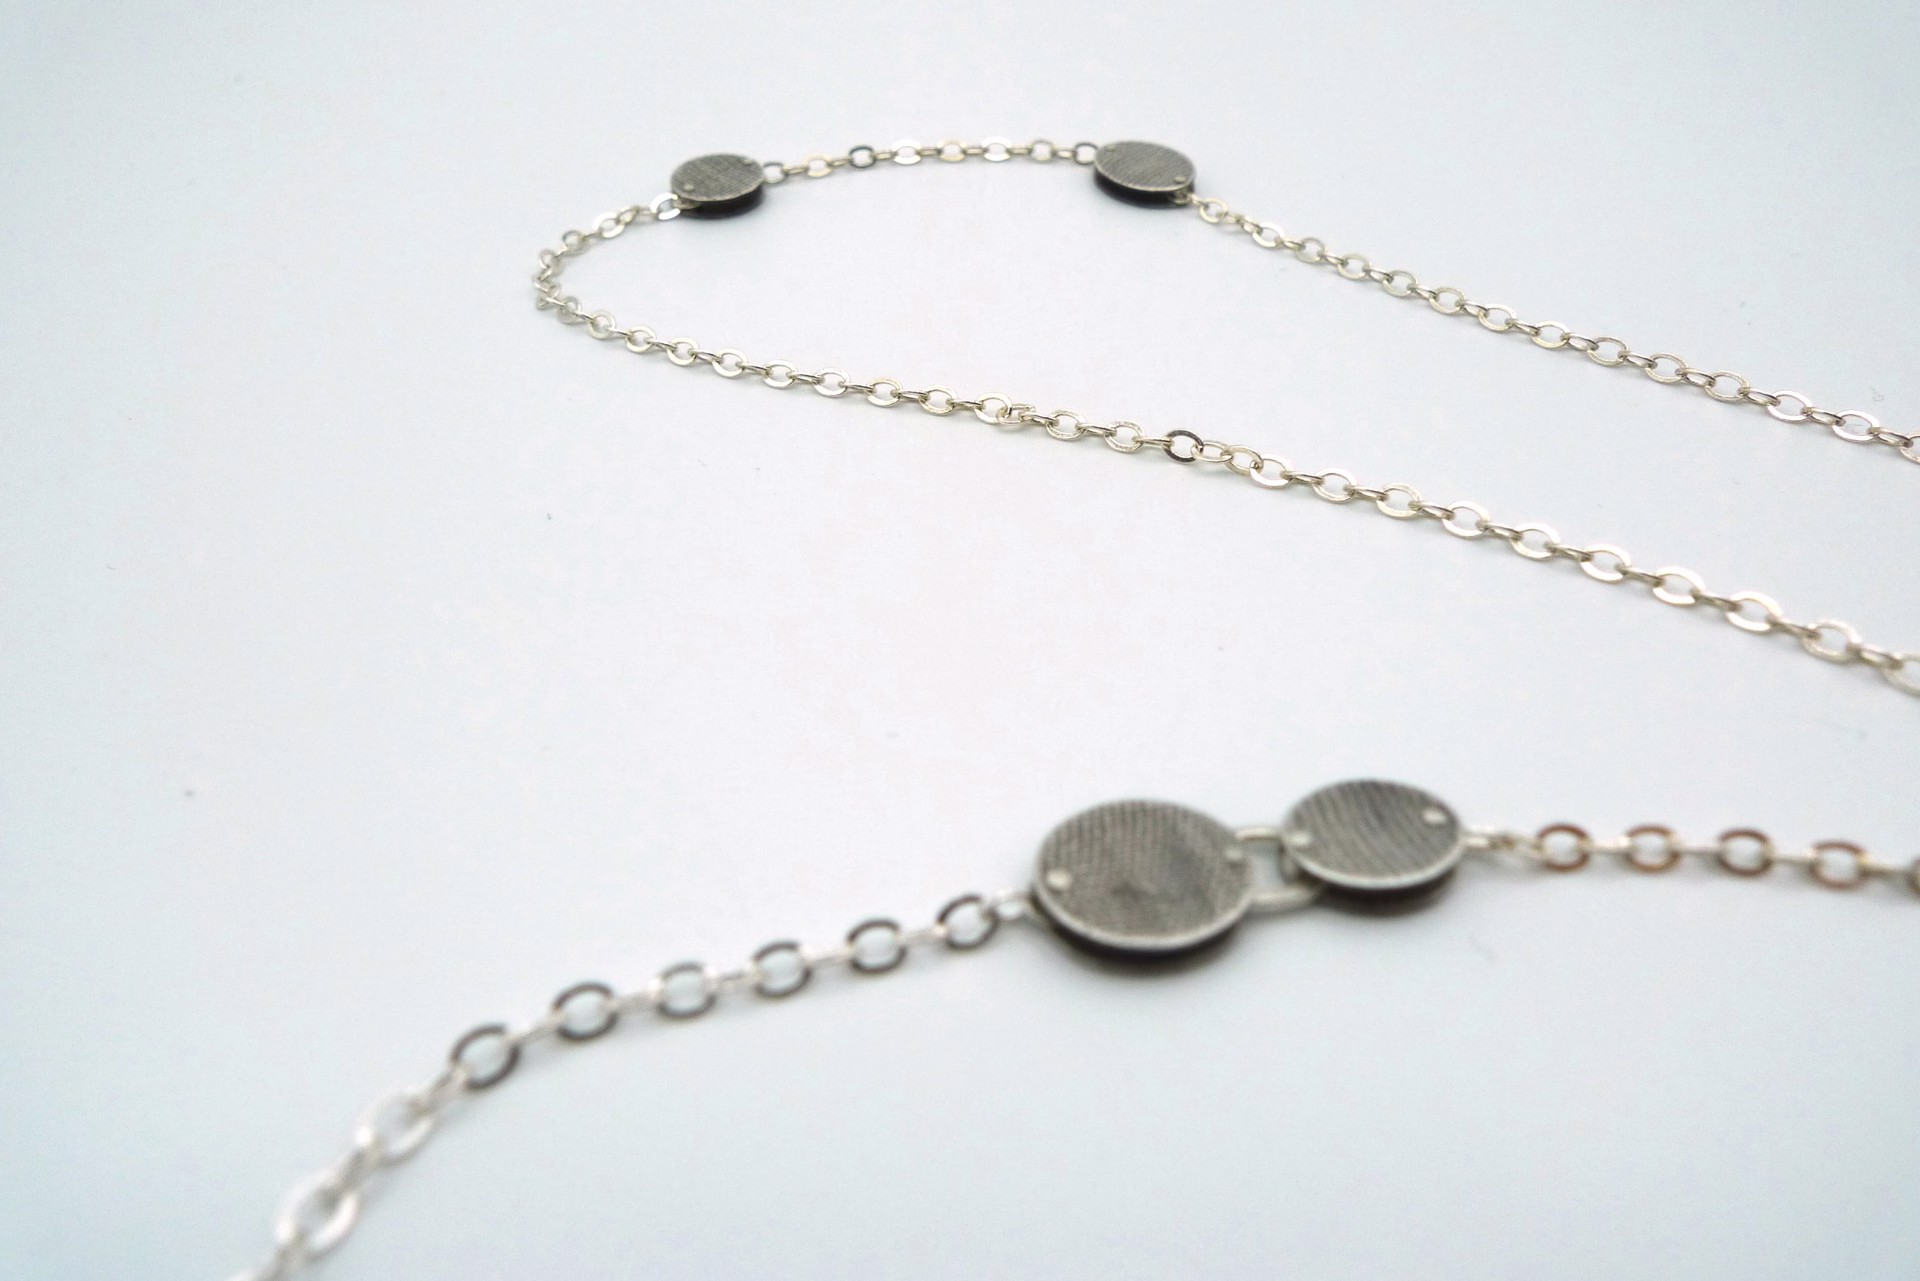 Long Sterling Silver Necklace by Erica Schlueter